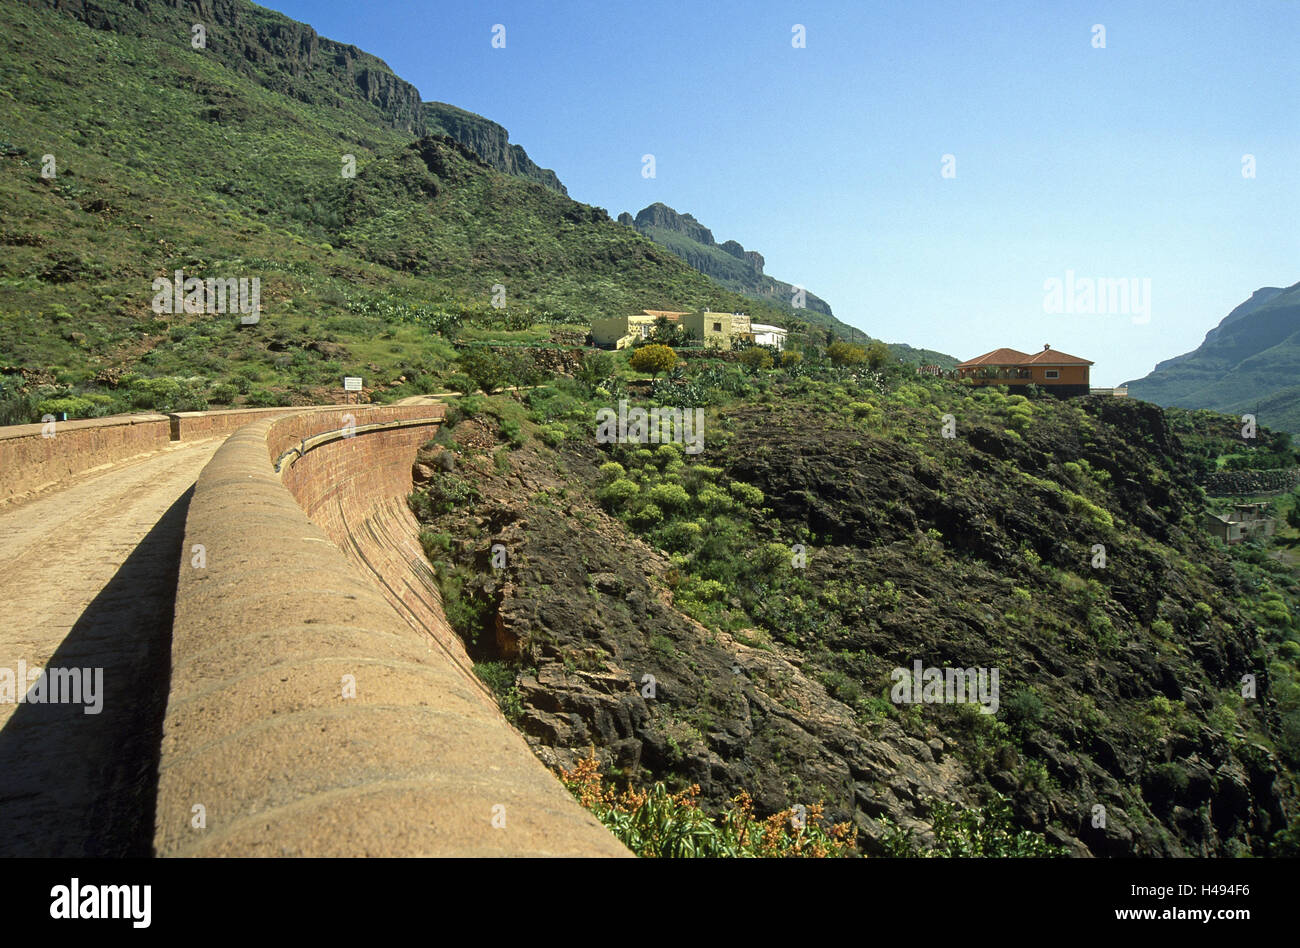 Spain, Canary islands, grain Canaria, Ayagaures, traffic jam defensive wall, mountain landscape, the Canaries, island group, island, Ayagaures, reservoir defensive wall, dam, traffic jam plant, stop structure, crest, street, houses, mountain hamlets, reservoir, water reservoir, nobody, mountains, mountains, scenery, Stock Photo